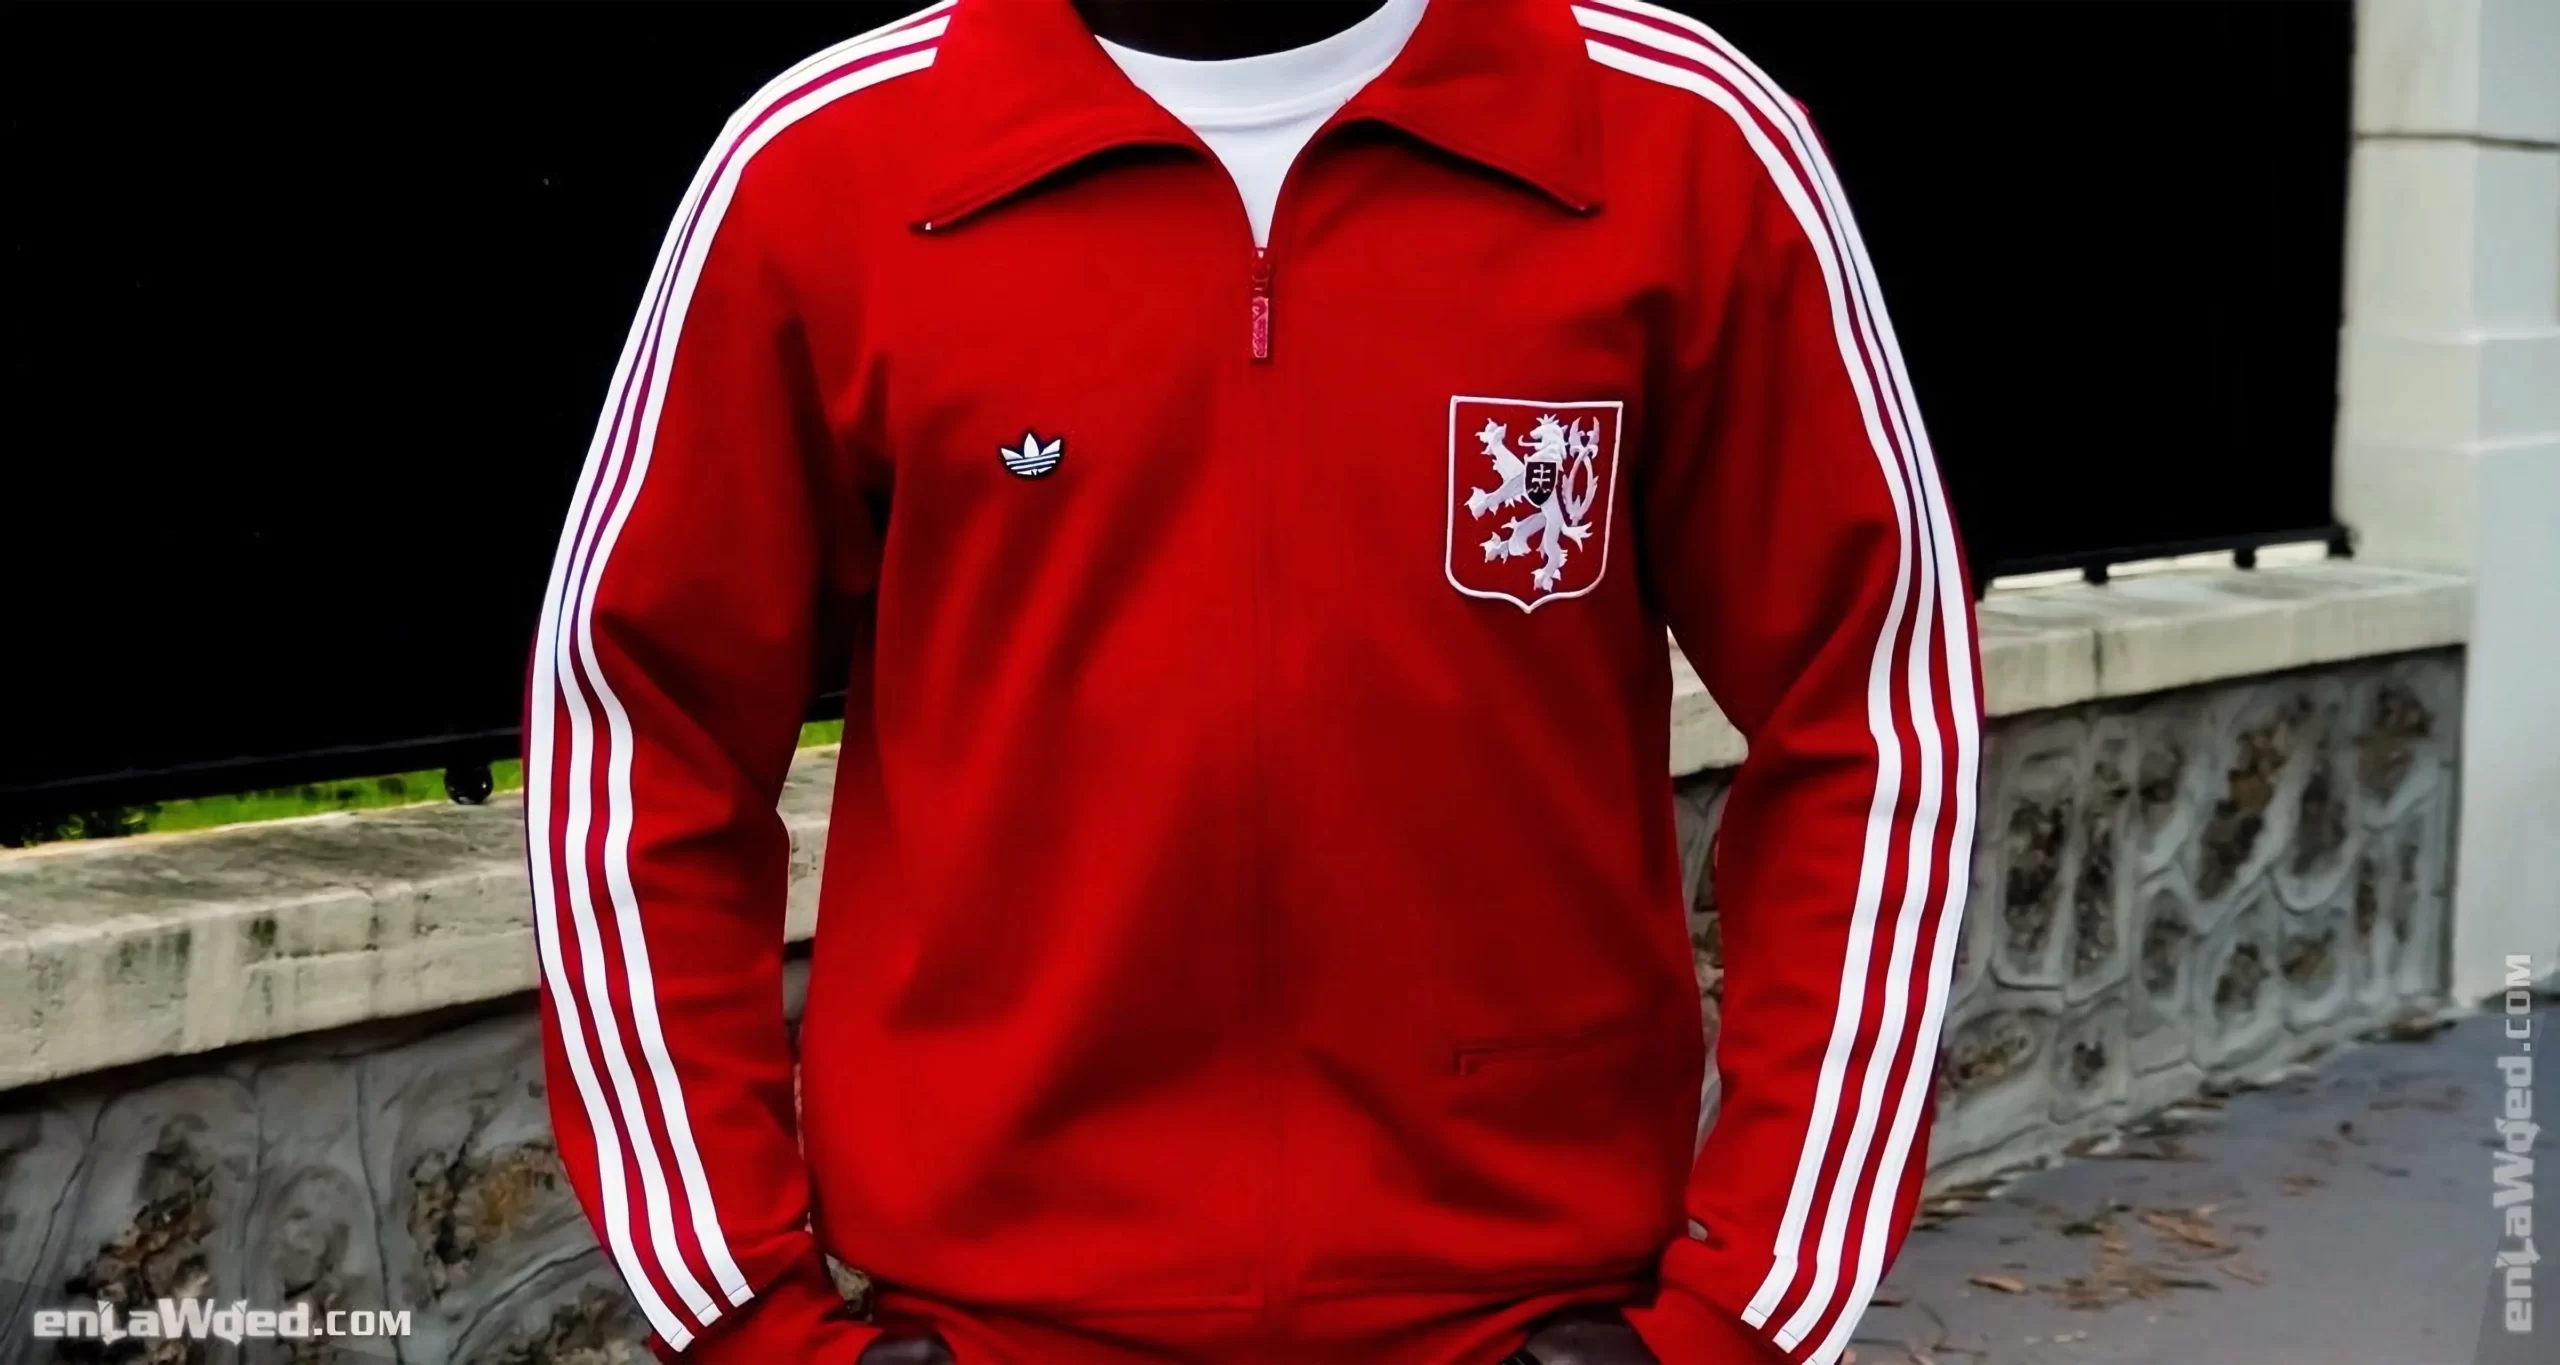 Men’s 2007 Slovakia Love Track Top by Adidas Originals: Uncovered (EnLawded.com file #lmcgg221m3cgtu7dr2q)